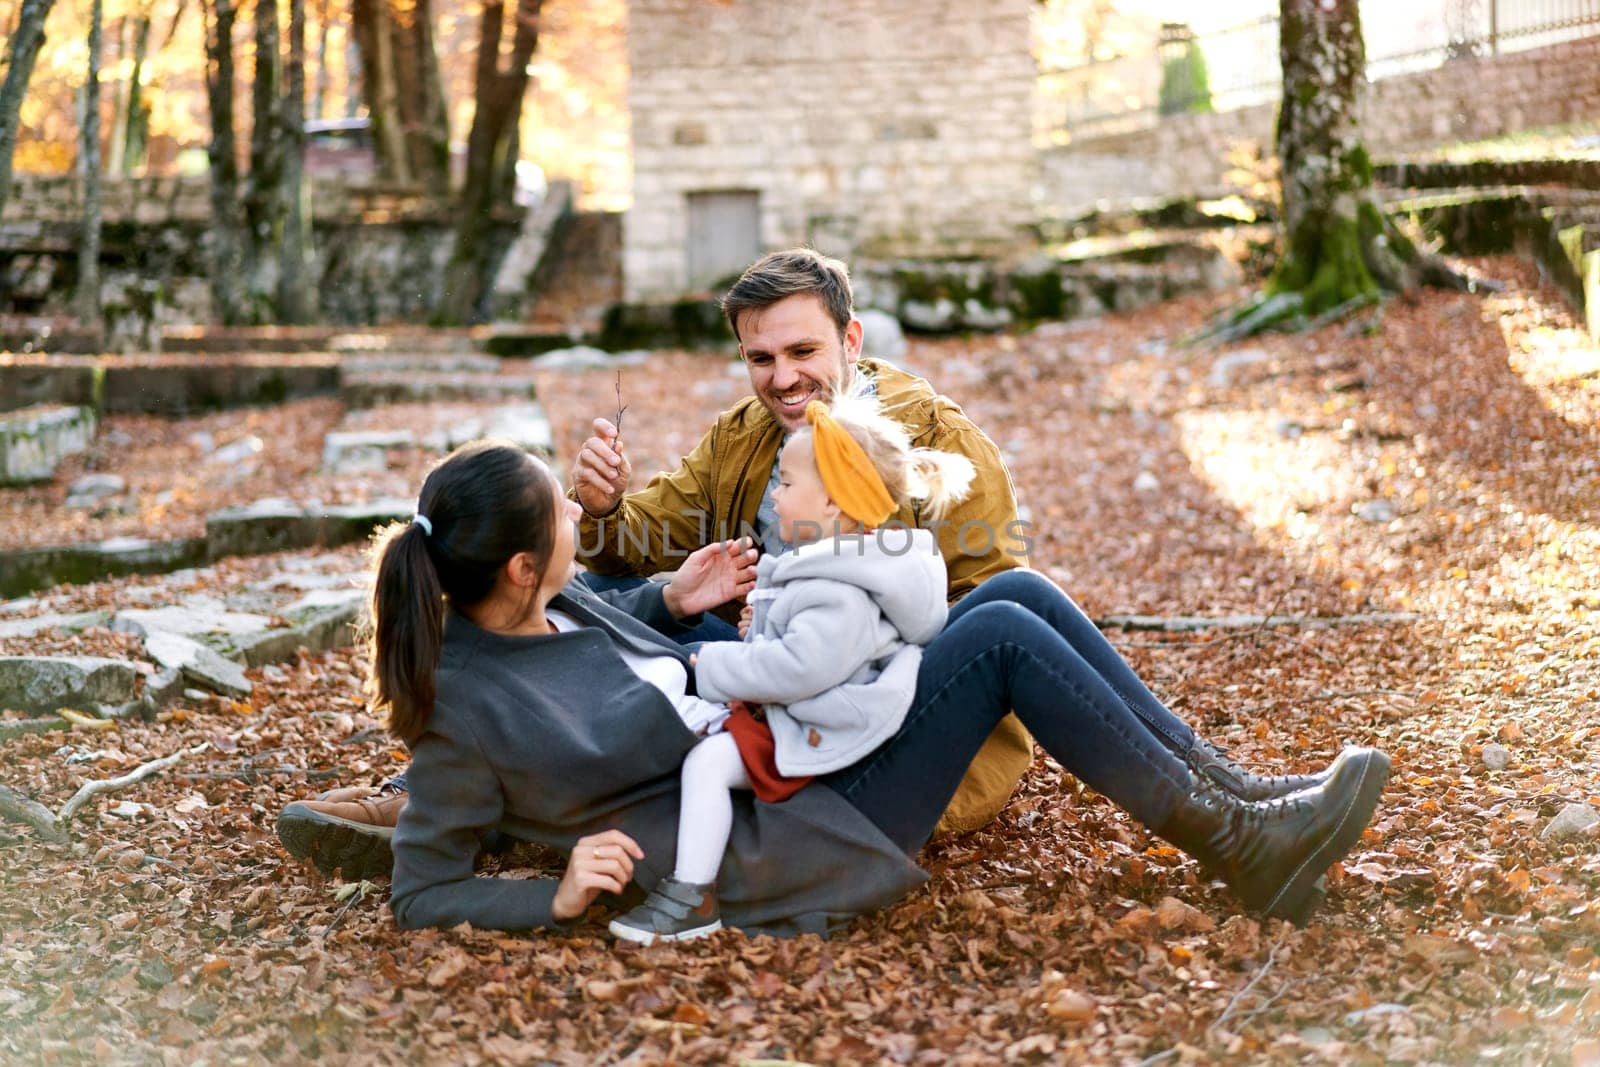 Smiling dad sits near mom with a little girl on her belly on fallen leaves in the forest. High quality photo